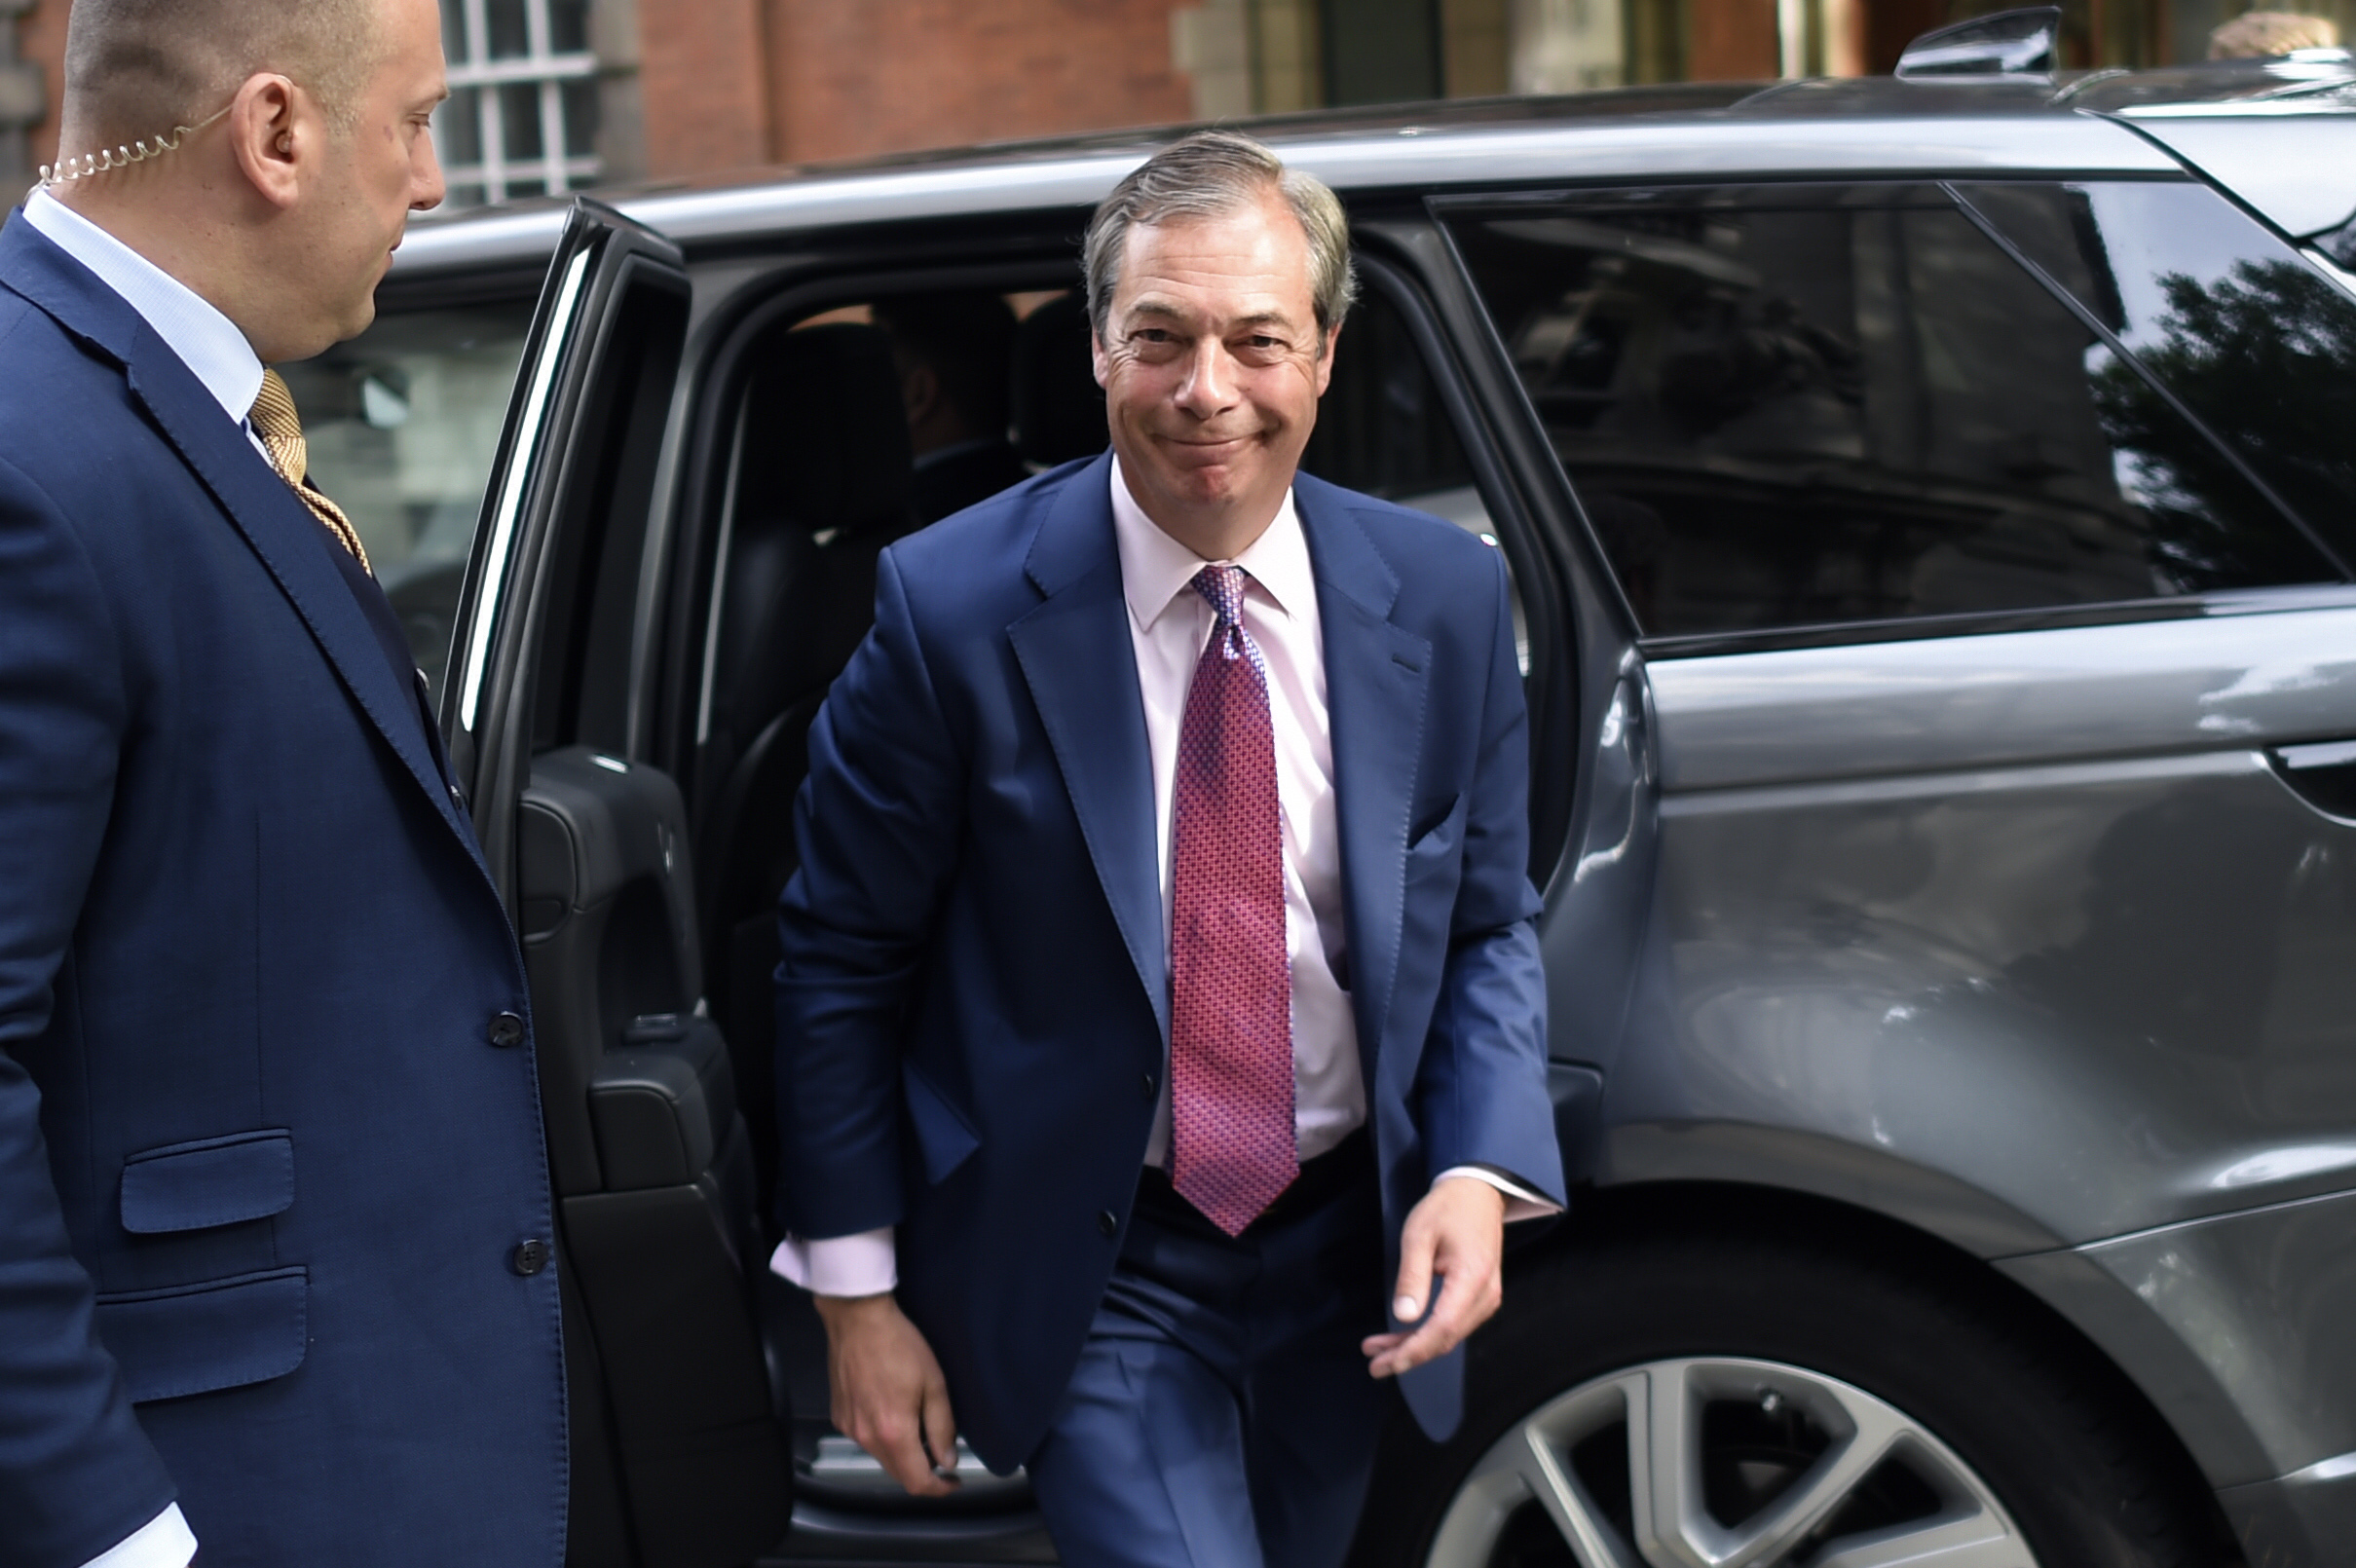 Brexit Party leader Nigel Farage arrives at Millbank Studios on May 27, 2019 in London, England. (Photo by Peter Summers/Getty Images)